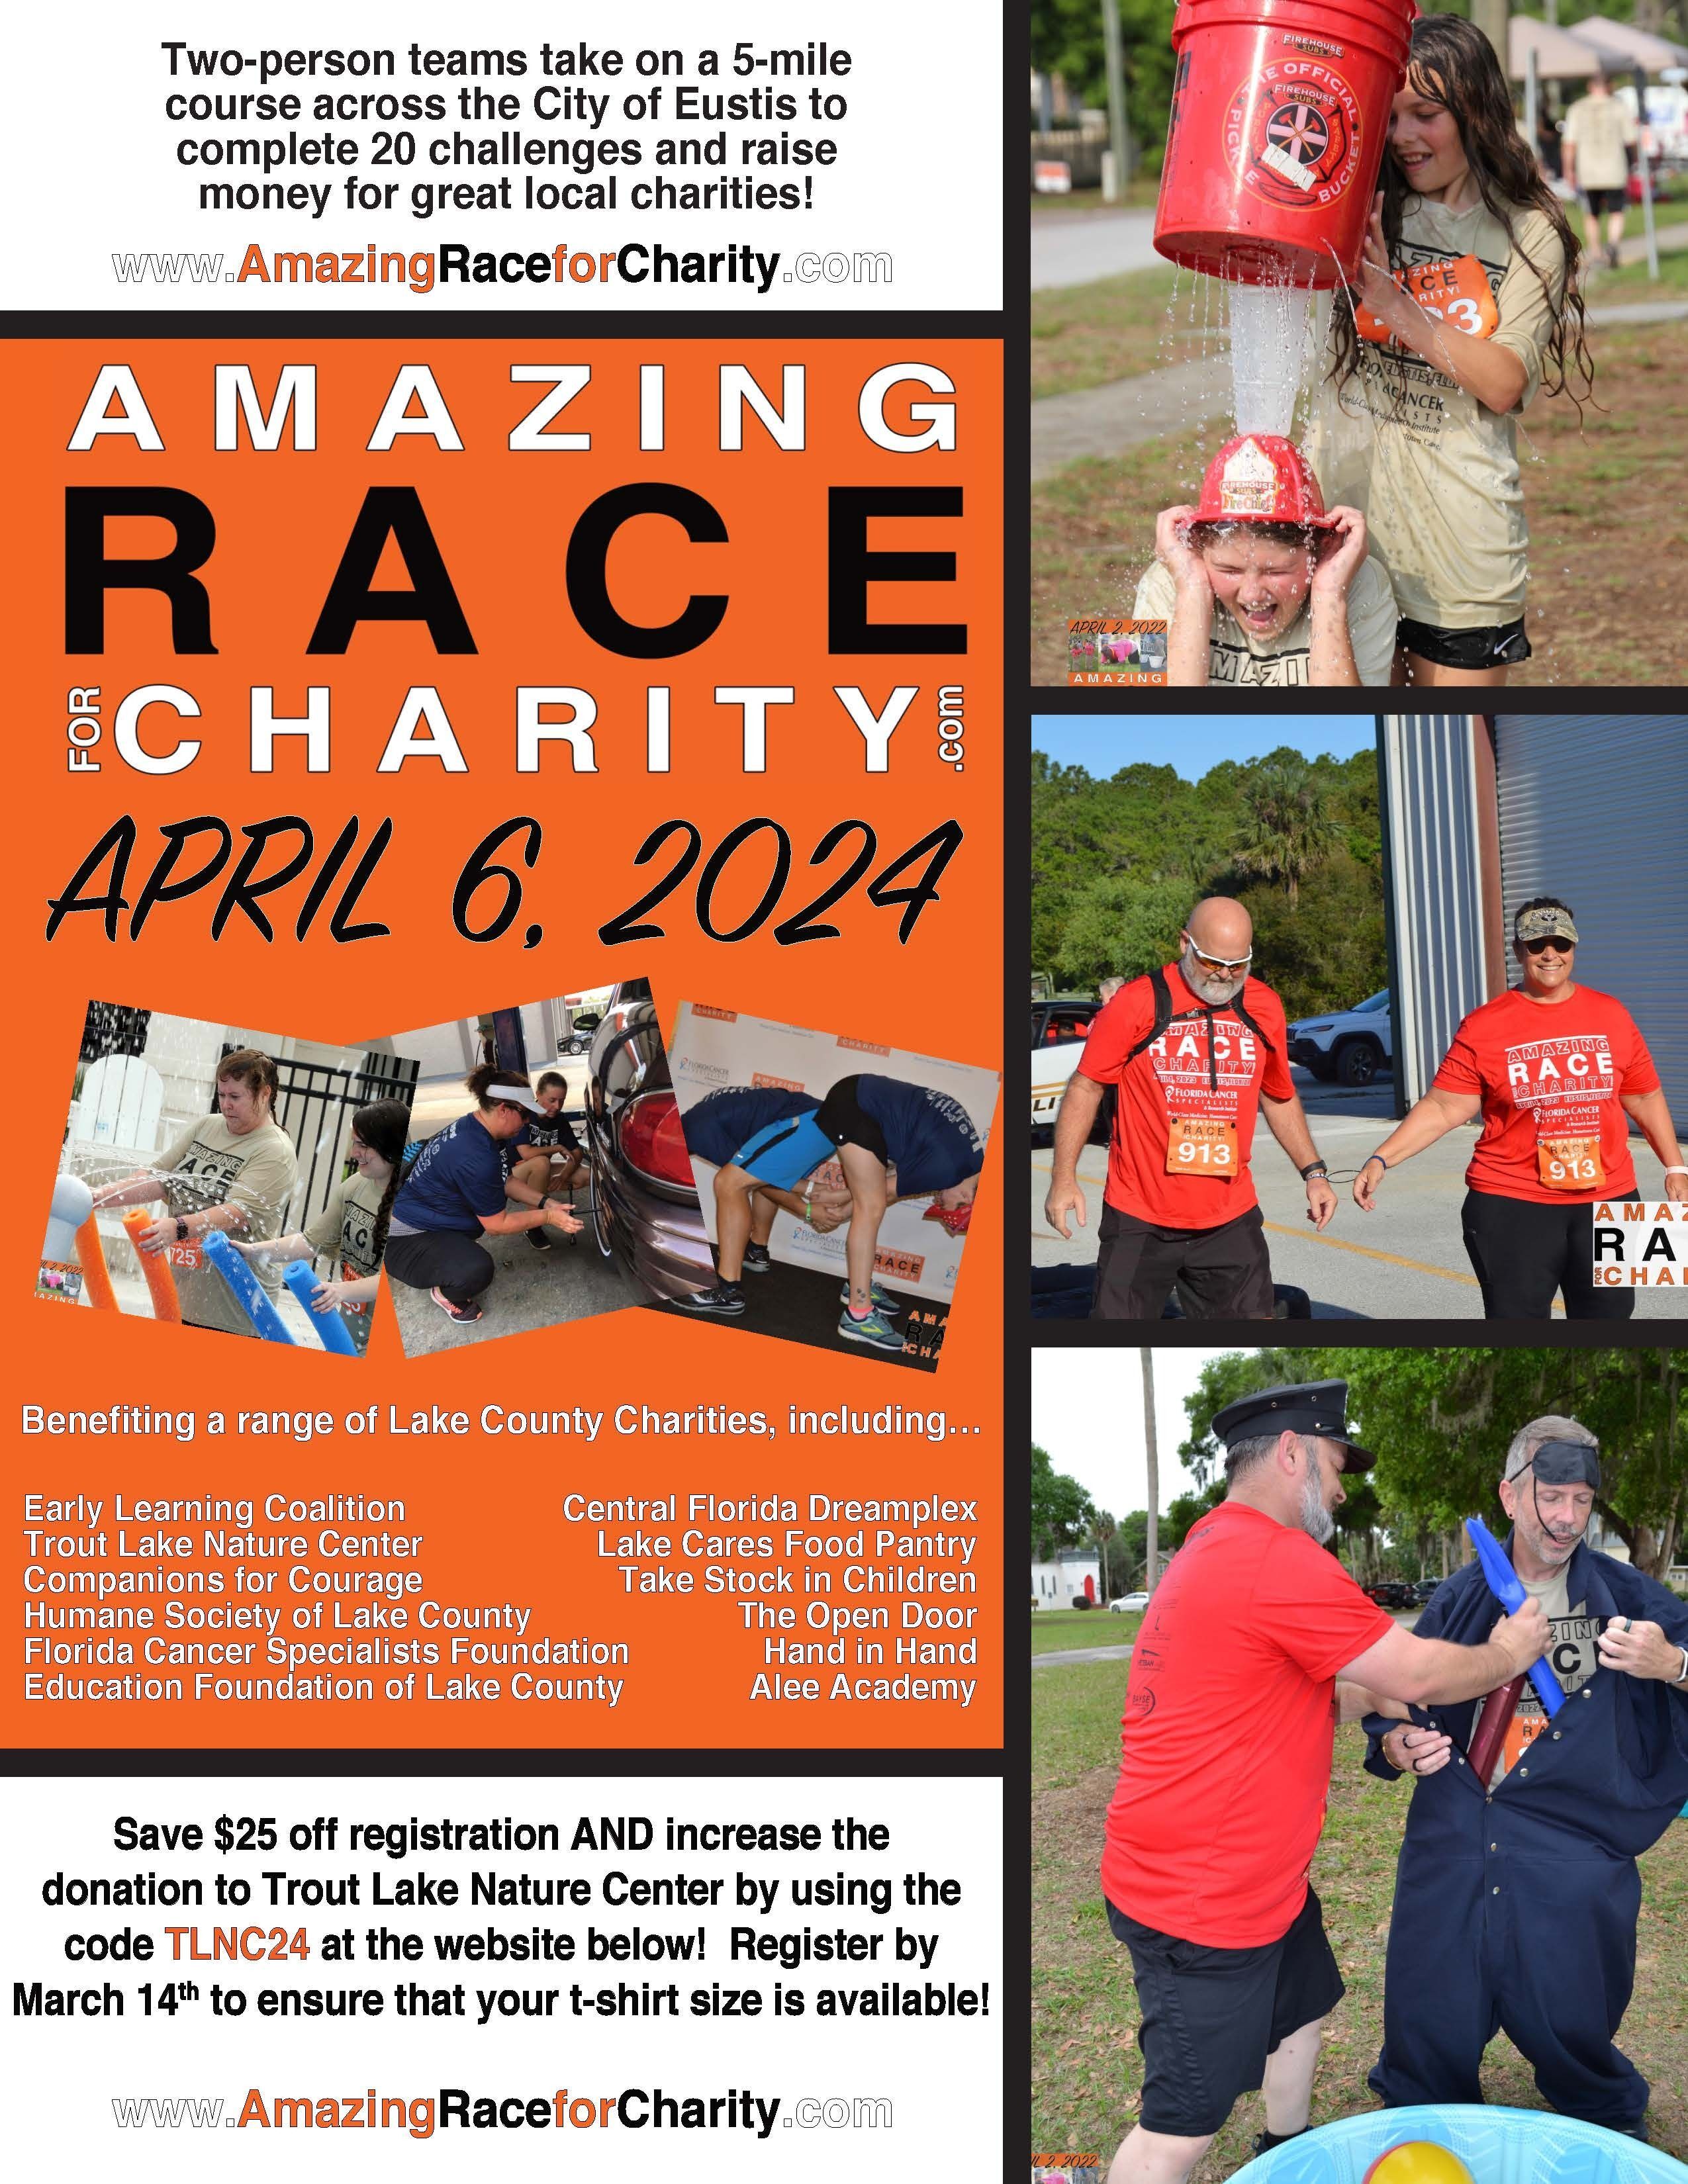 Amazing Race for Charity:  April 6, 2024